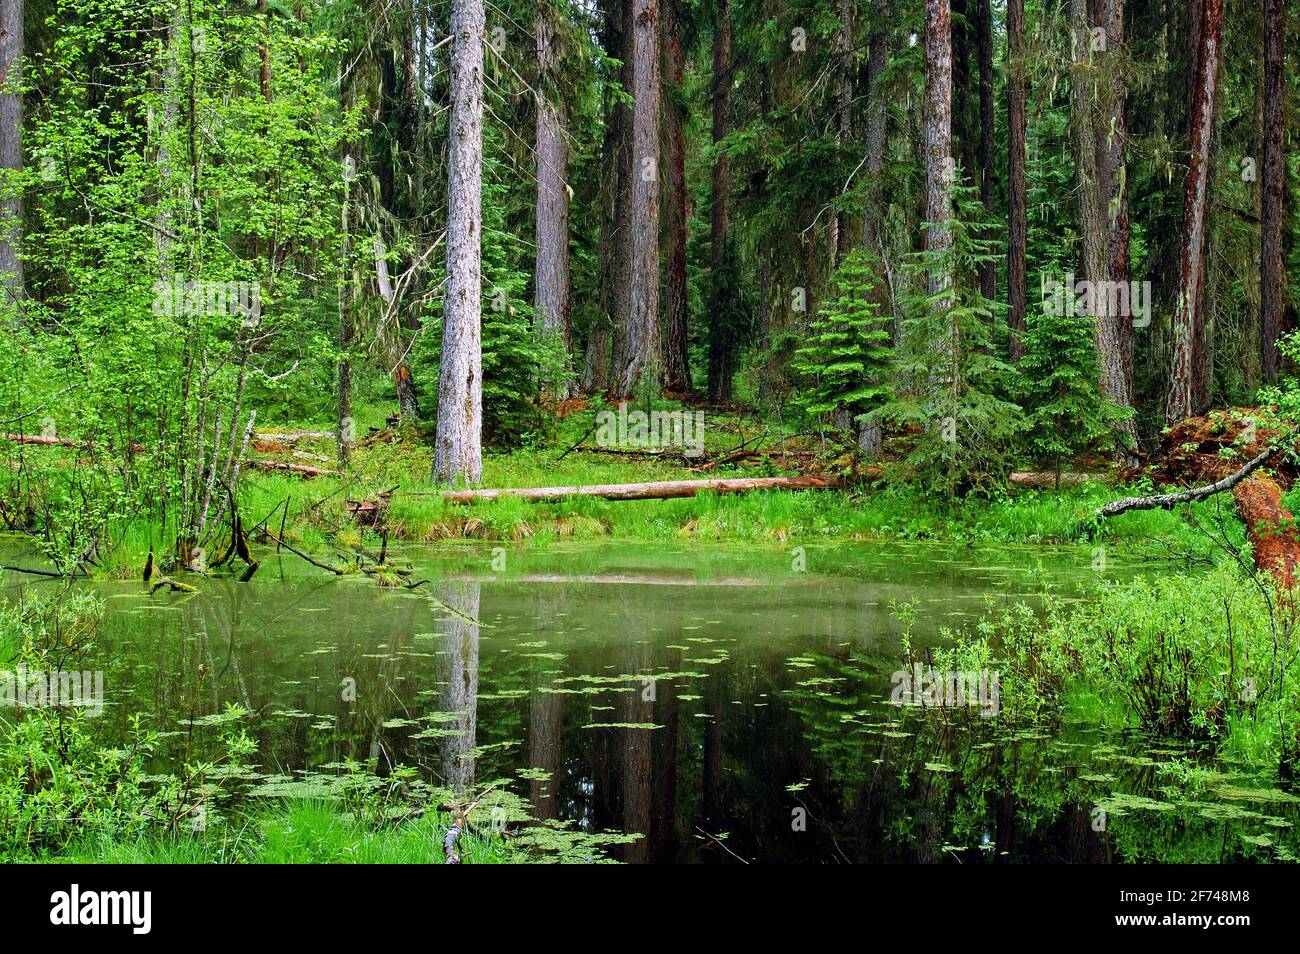 Wetland pond in an old-growth forest. Kootenai National Forest in the Yaak Valley, Northwest Montana. (Photo by Randy Beacham) Stock Photo